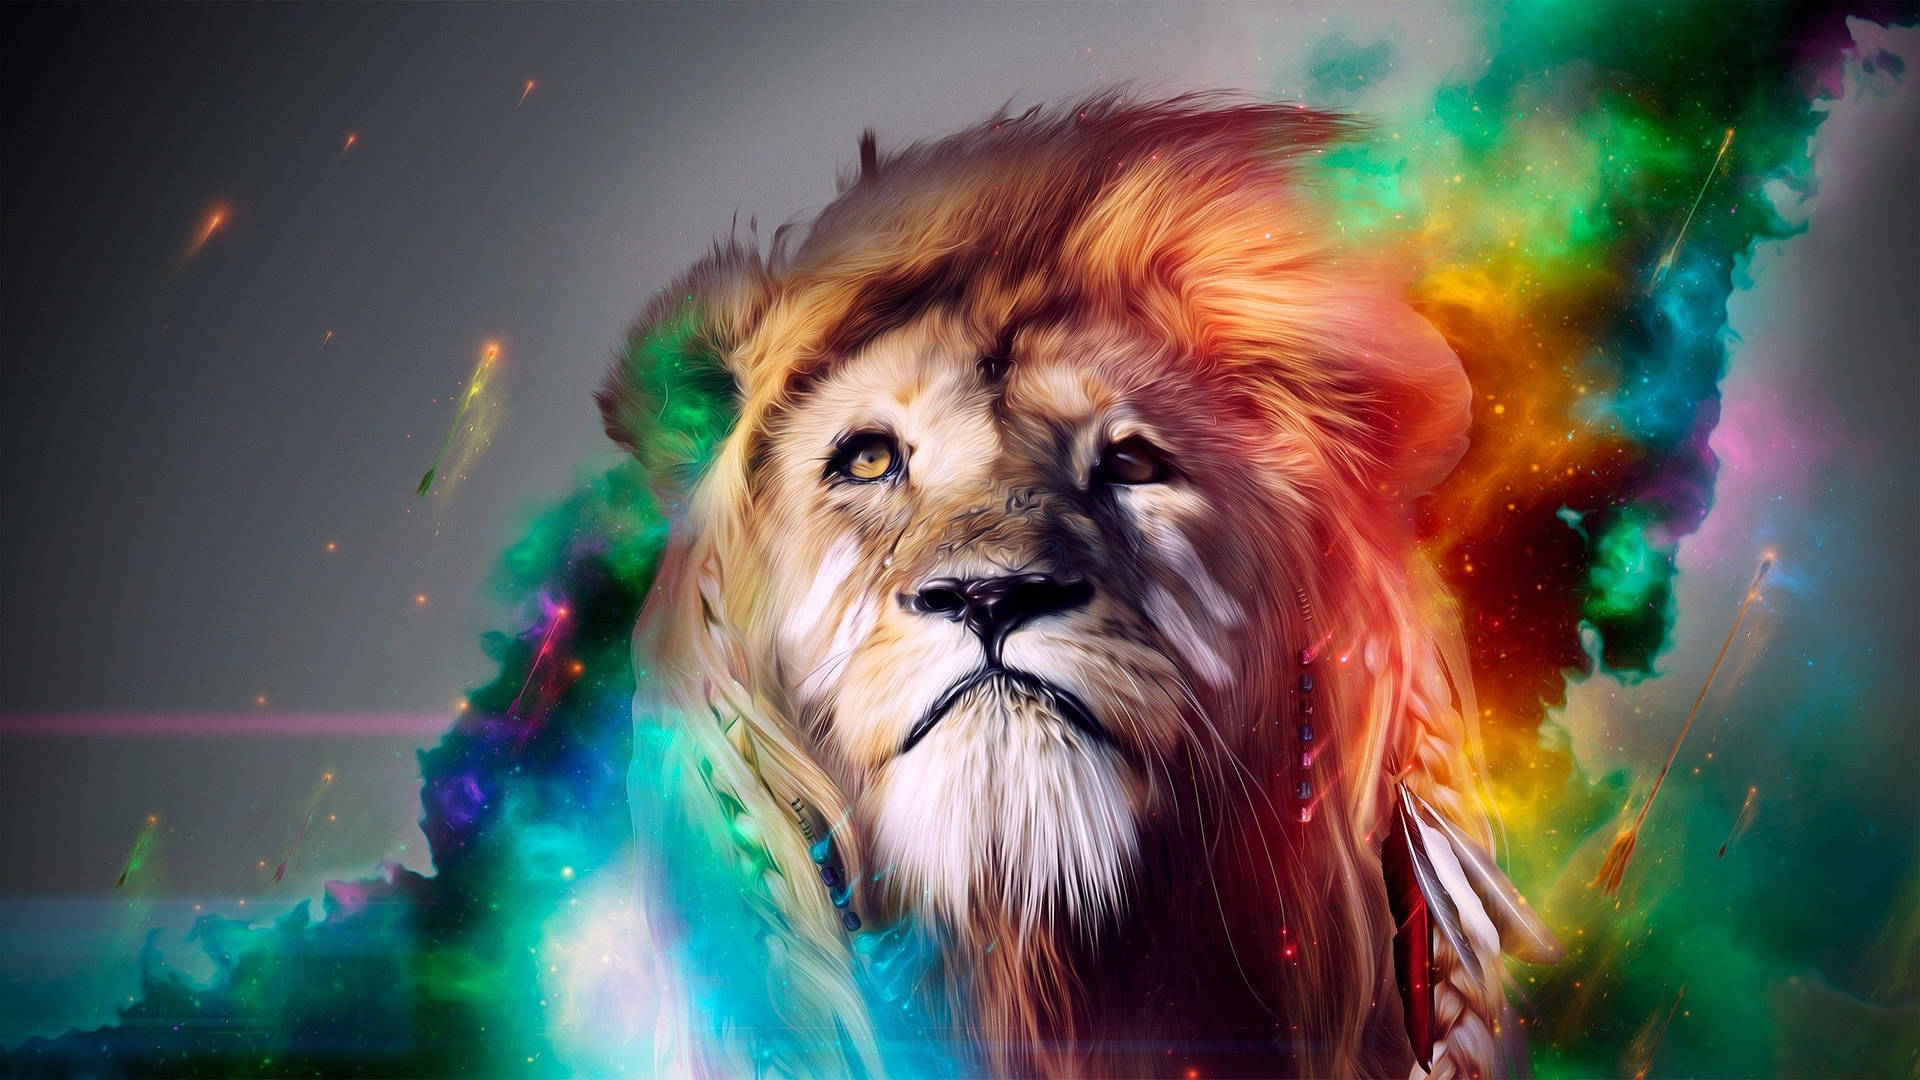 Cool Lion Pictures Wallpaper